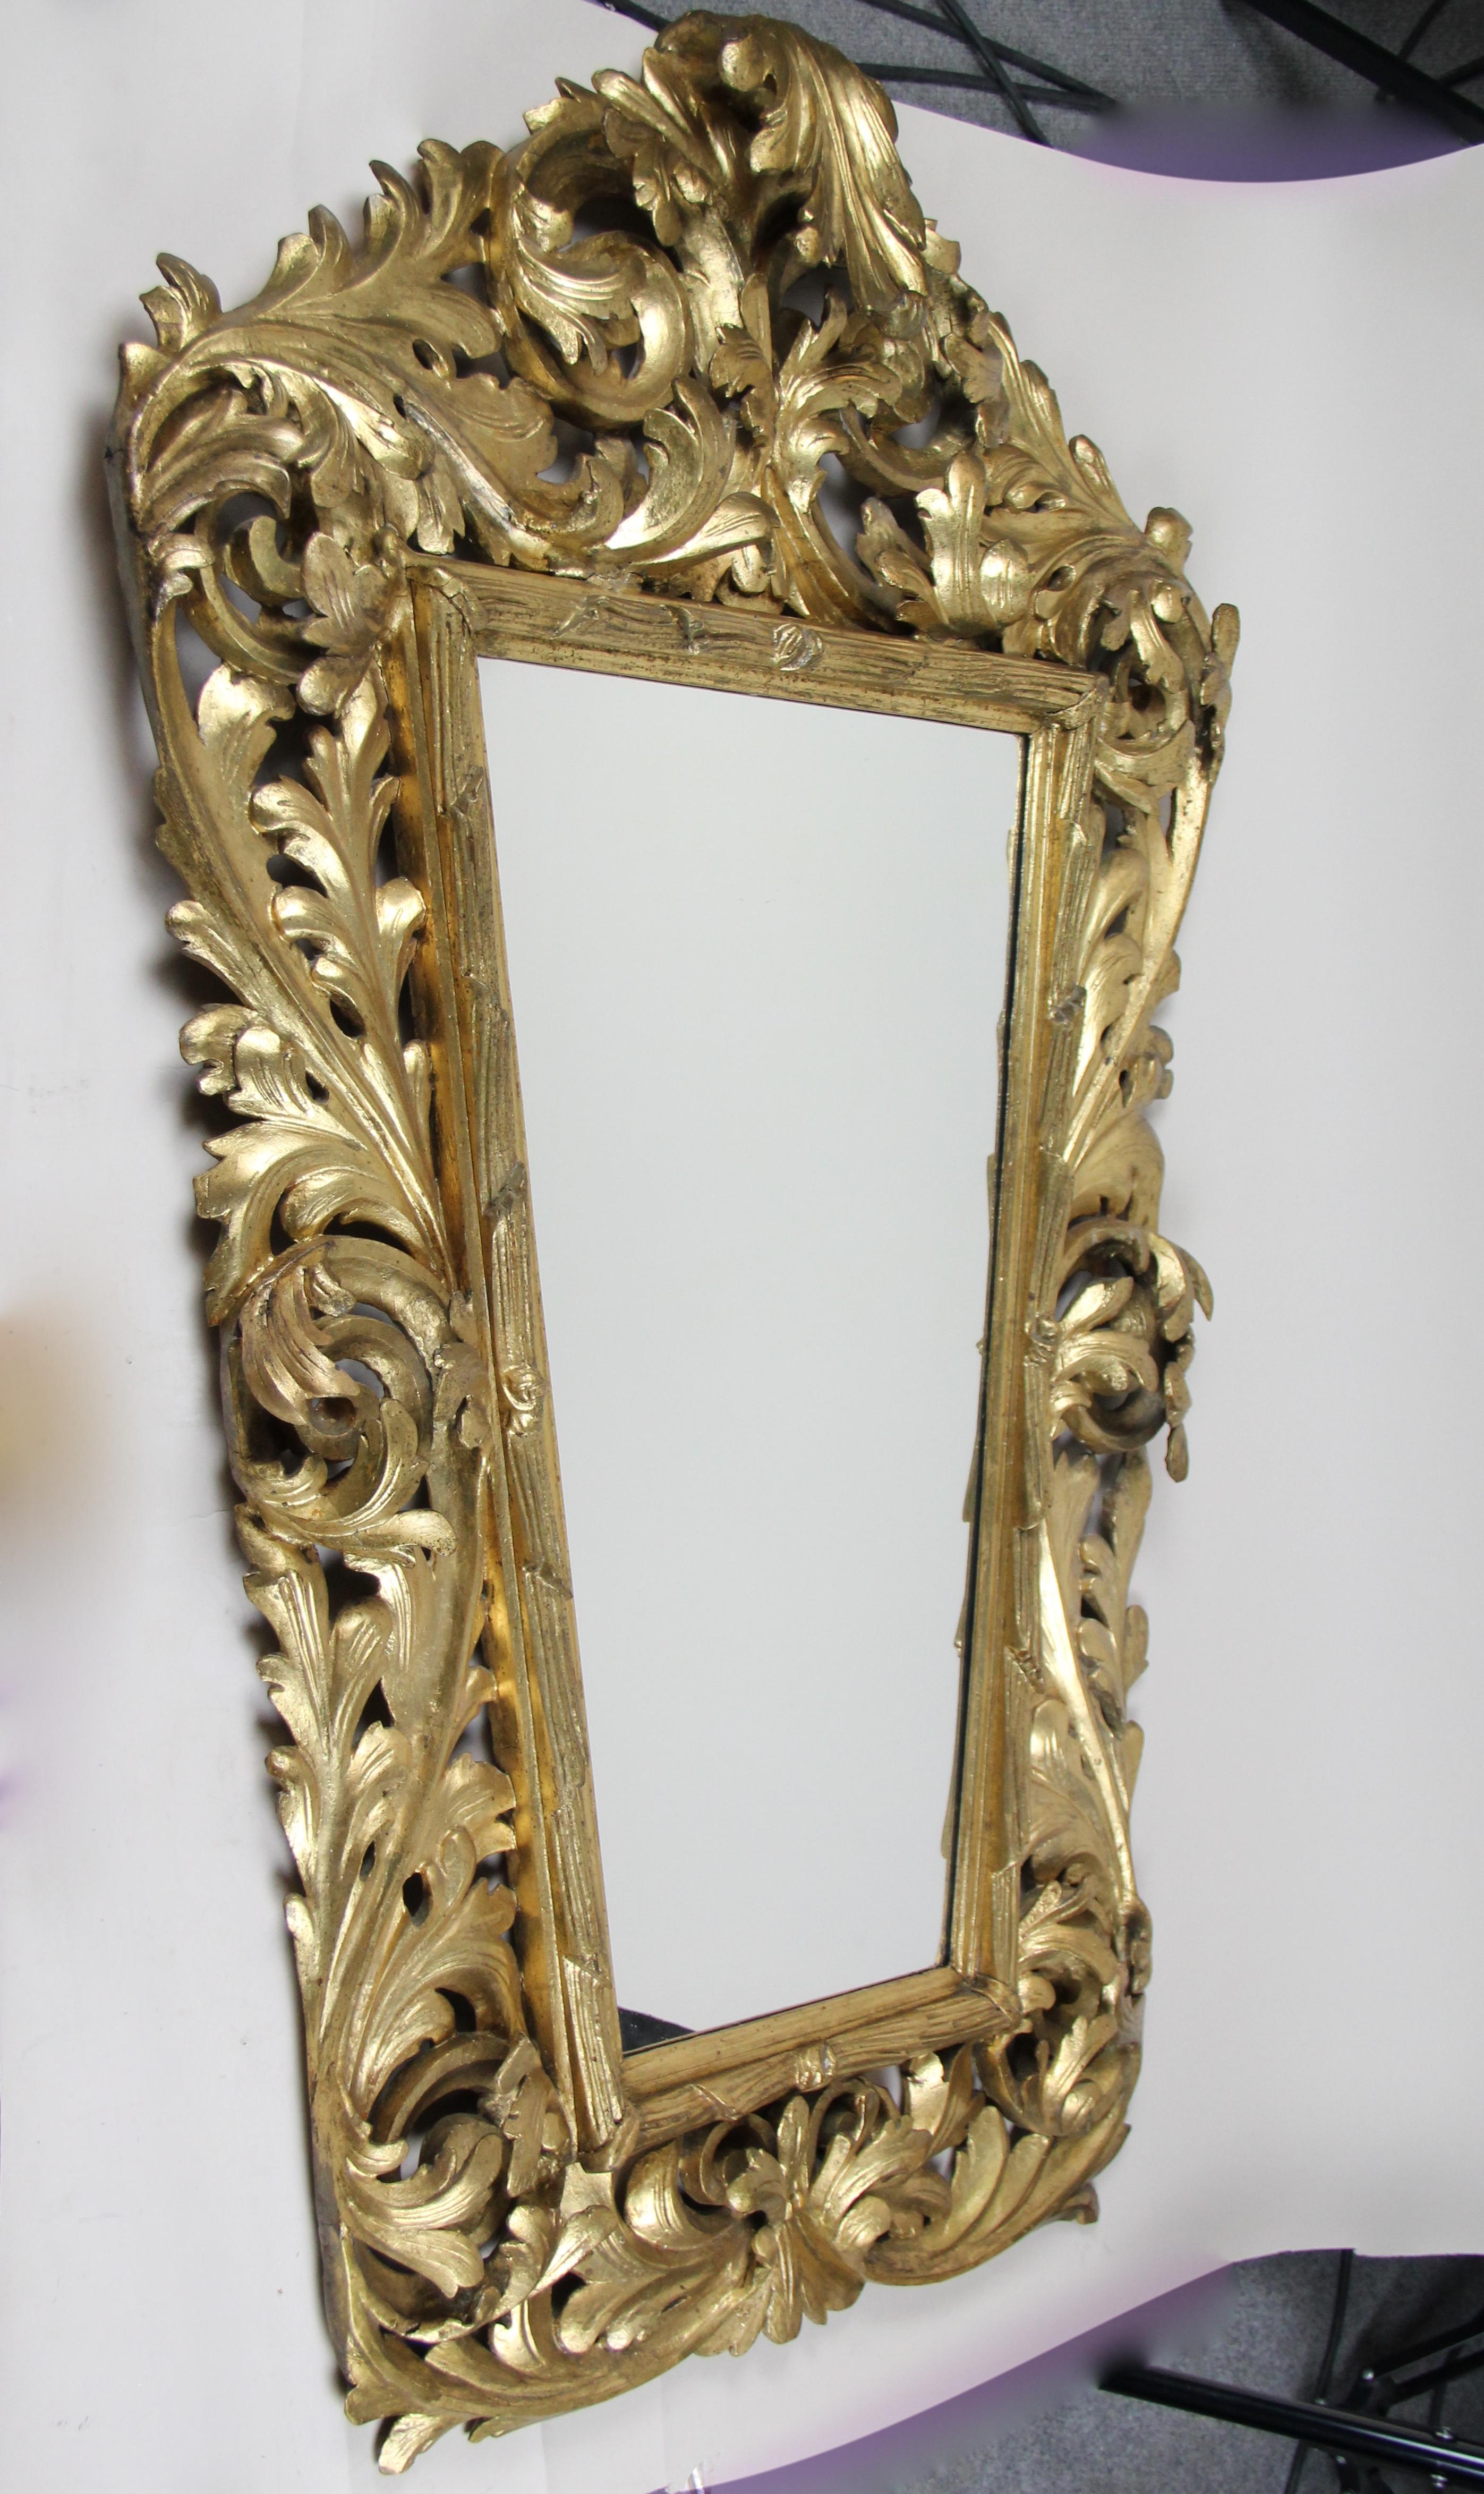 Majestic hand carved gilt Florentine wall mirror from Austria dating back to the mid-19th century, circa 1850. The massive basswood frame is ornamented by elaborately hand carved acanthus leaf motifs. Unique shaped lines in combination with an